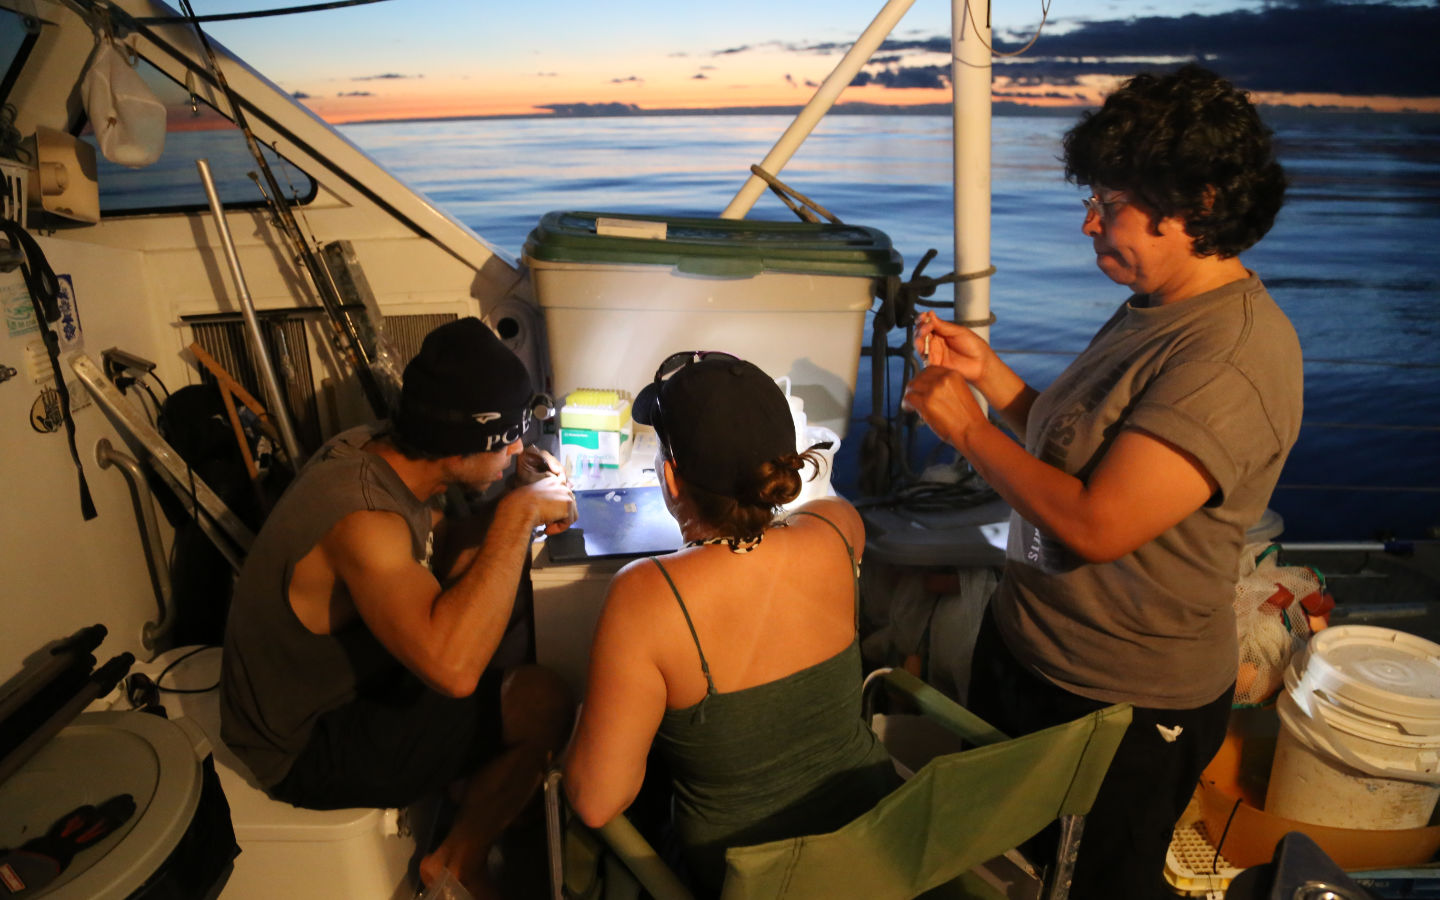 Scientist on boat at sea take study fish samples at sunset.